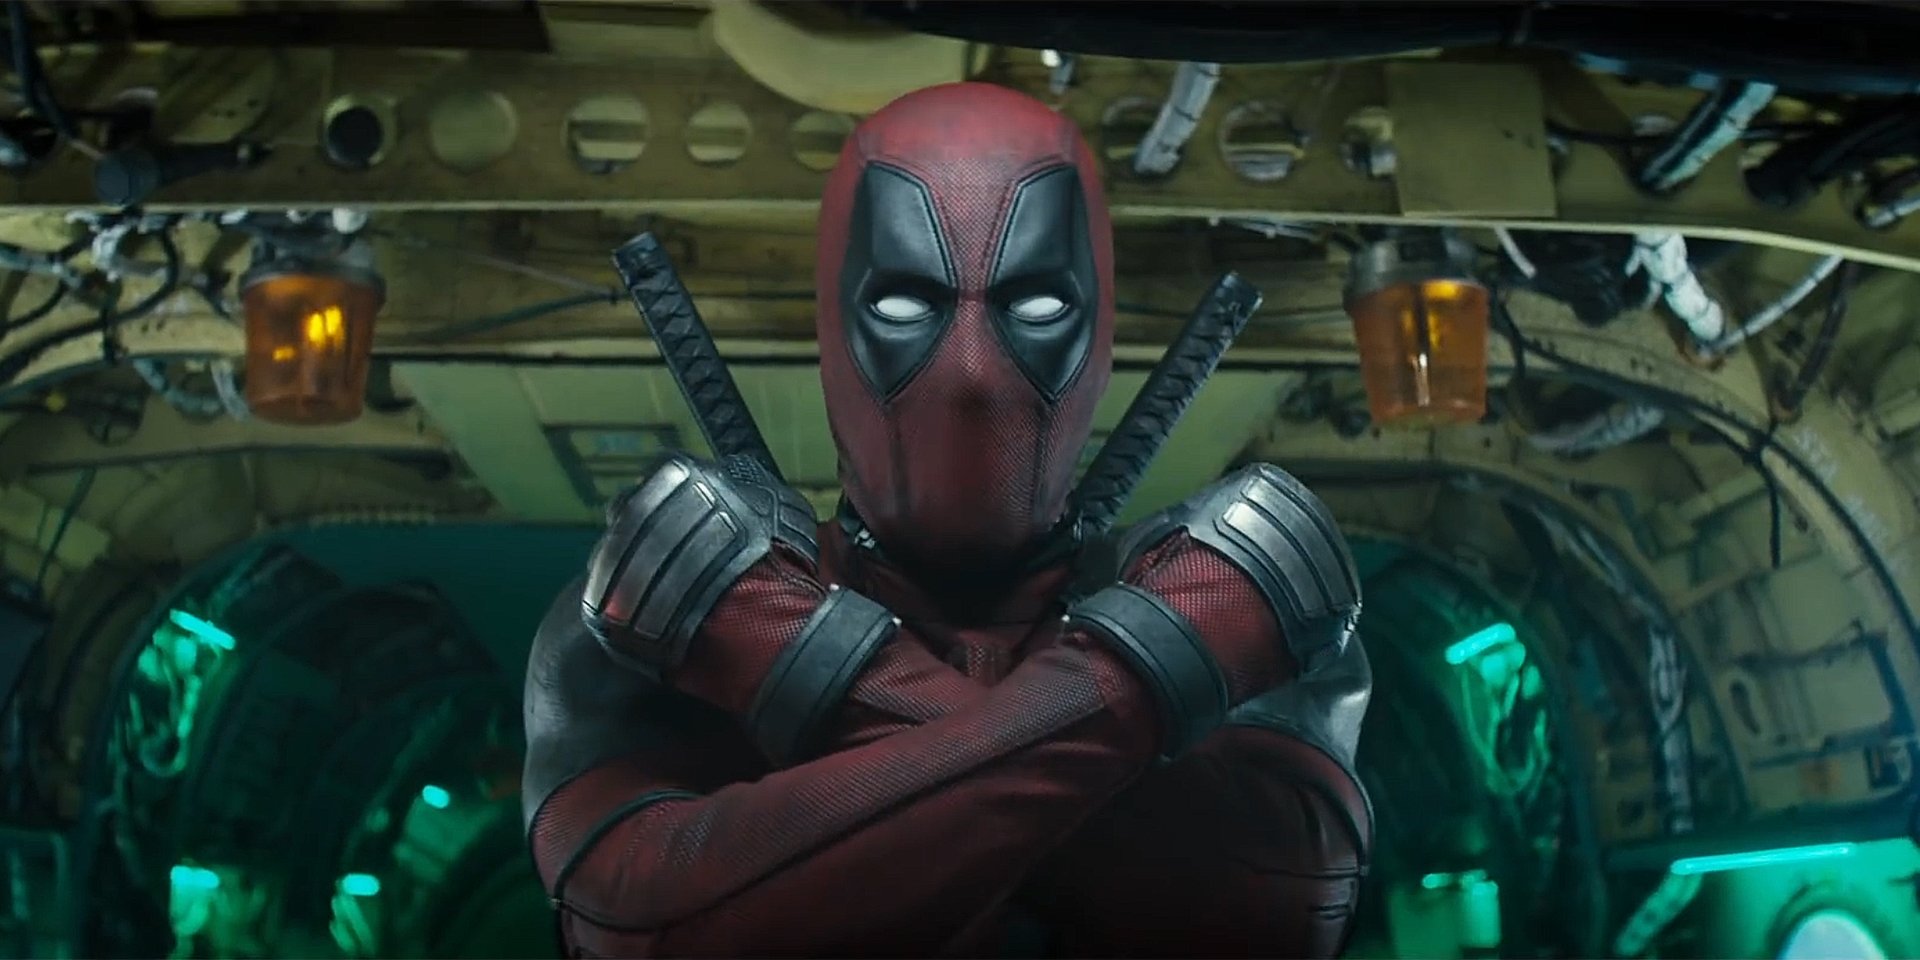 'Deadpool 2' sets its sights on toppling 'Avengers: Infinity War' and record-setting R-rated weekend